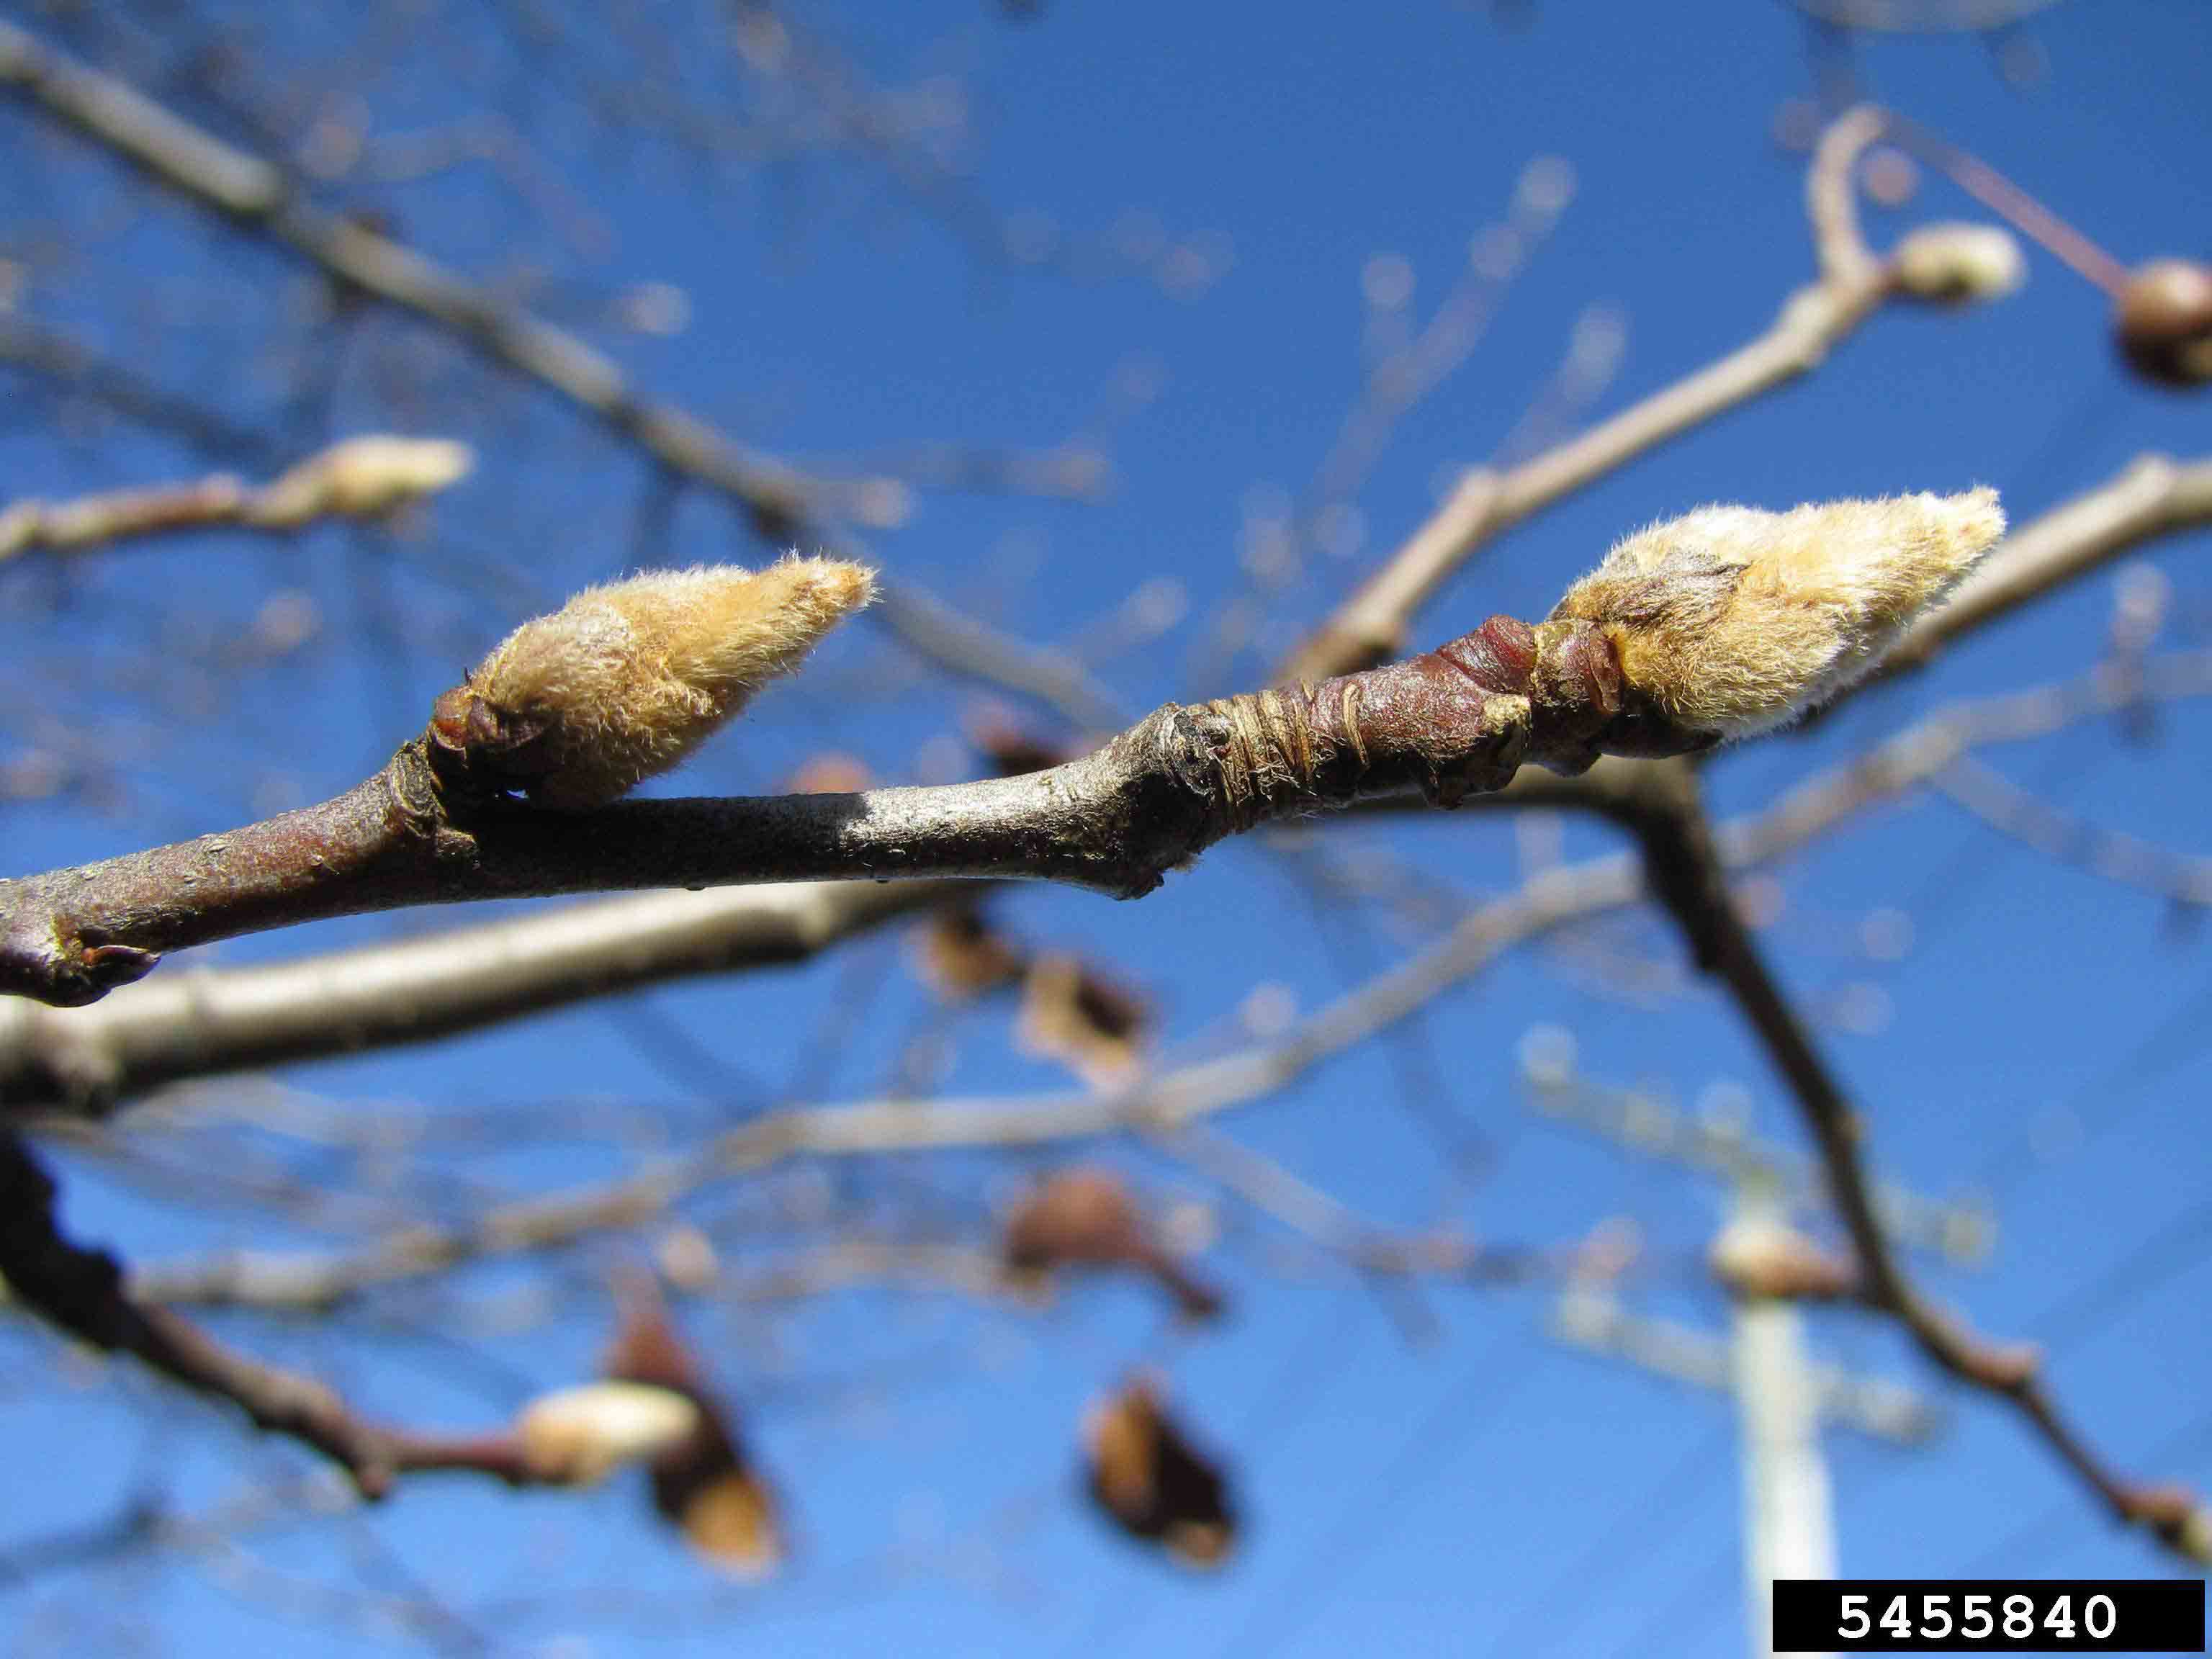 Bradford Callery pear twig with buds